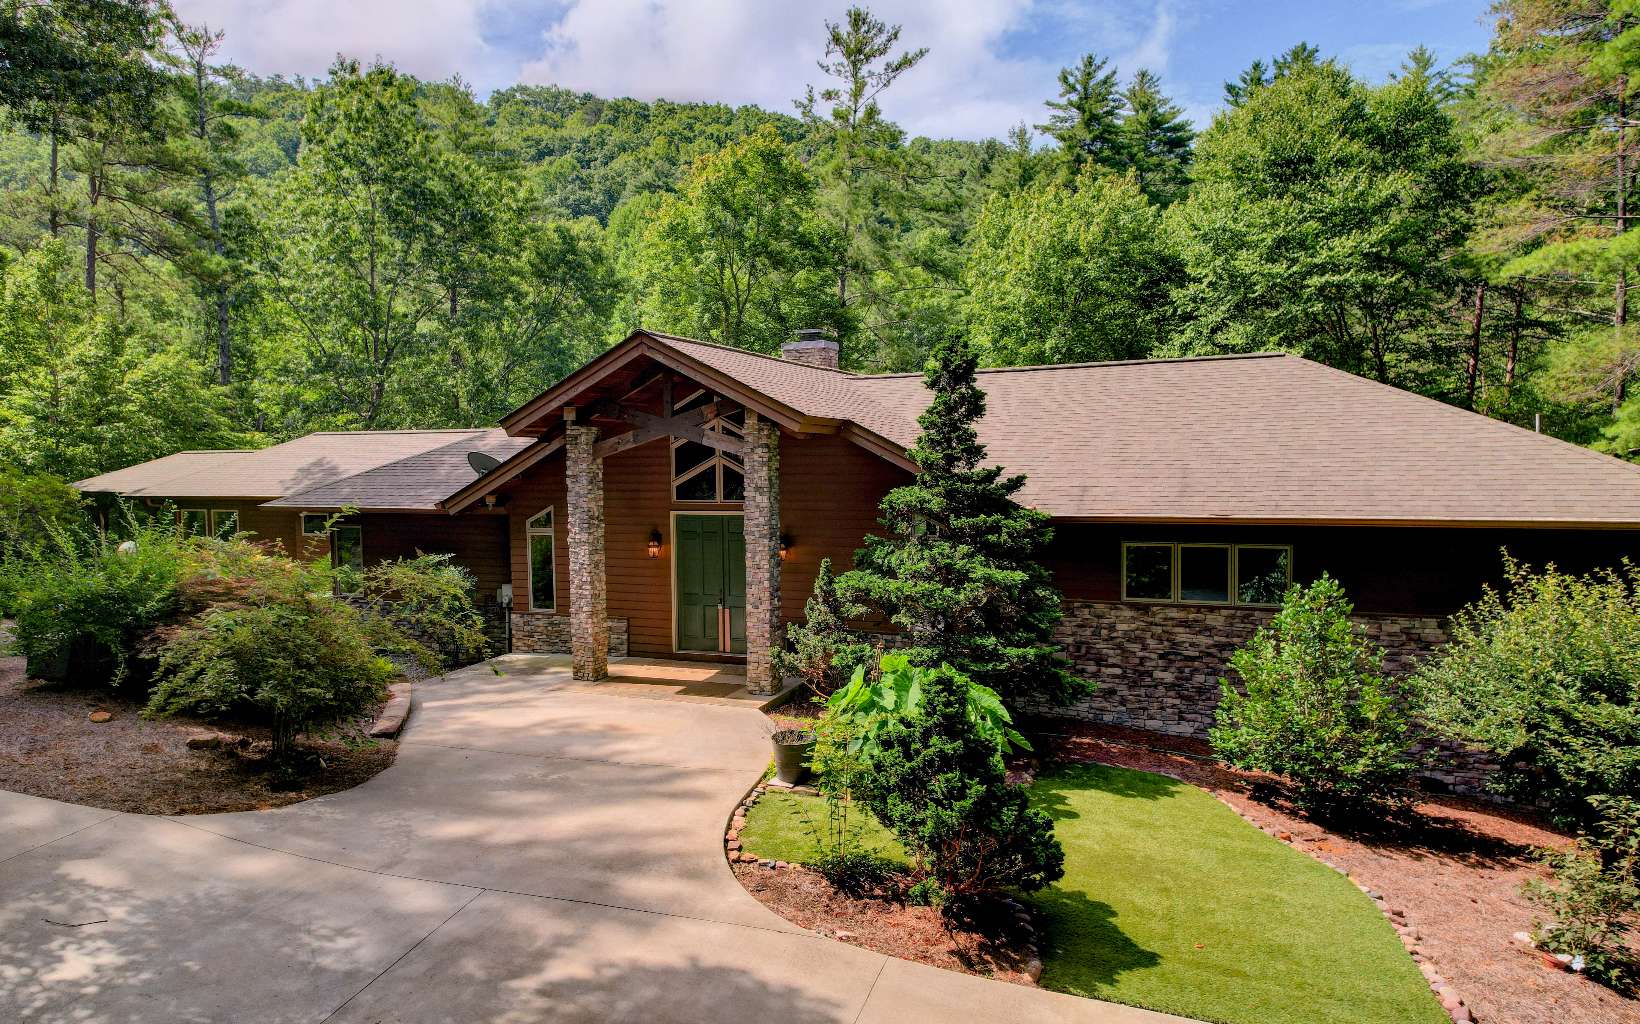 PRICE REDUCED- Mountain Paradise with over 25 acres that includes waterfalls/koi pond, creek, trails, gardens and much more! This home has a central location to both Blue Ridge and Ellijay amenities yet offers complete privacy with low maintenance. Exquisite 3 bedroom (plus office), 3.5 bath home with over 2500 square feet on main level and features soaring cedar ceilings with beams, double sided fireplace, oak floors and a spacious open floor plan. The master suite has double door entry and includes private balcony, master bath with double sinks/cabinets, separate shower and soaking tub, large custom walk in closet and a sunroom overlooking the waterfall/koi pond as well as a private deck. The kitchen includes double ovens, plenty of cabinets and counter space and a large pantry with dumbwaiter. There are 2 additional bedrooms on main level as well as an office with custom built in workspace. One of the bedrooms is an ensuite w/private bath. The partially finished basement includes a 1/2 bath and is ready for completion. Whitepath Golf Course and vineyards are nearby. There are 2 wells and an oversized 2 car attached garage. There is an additional 15 acre parcel that borders national forest that may be purchased separately. Properties like this are a hard find in the area. Come see this breathtaking property and all that it offers! MOTIVATED SELLER